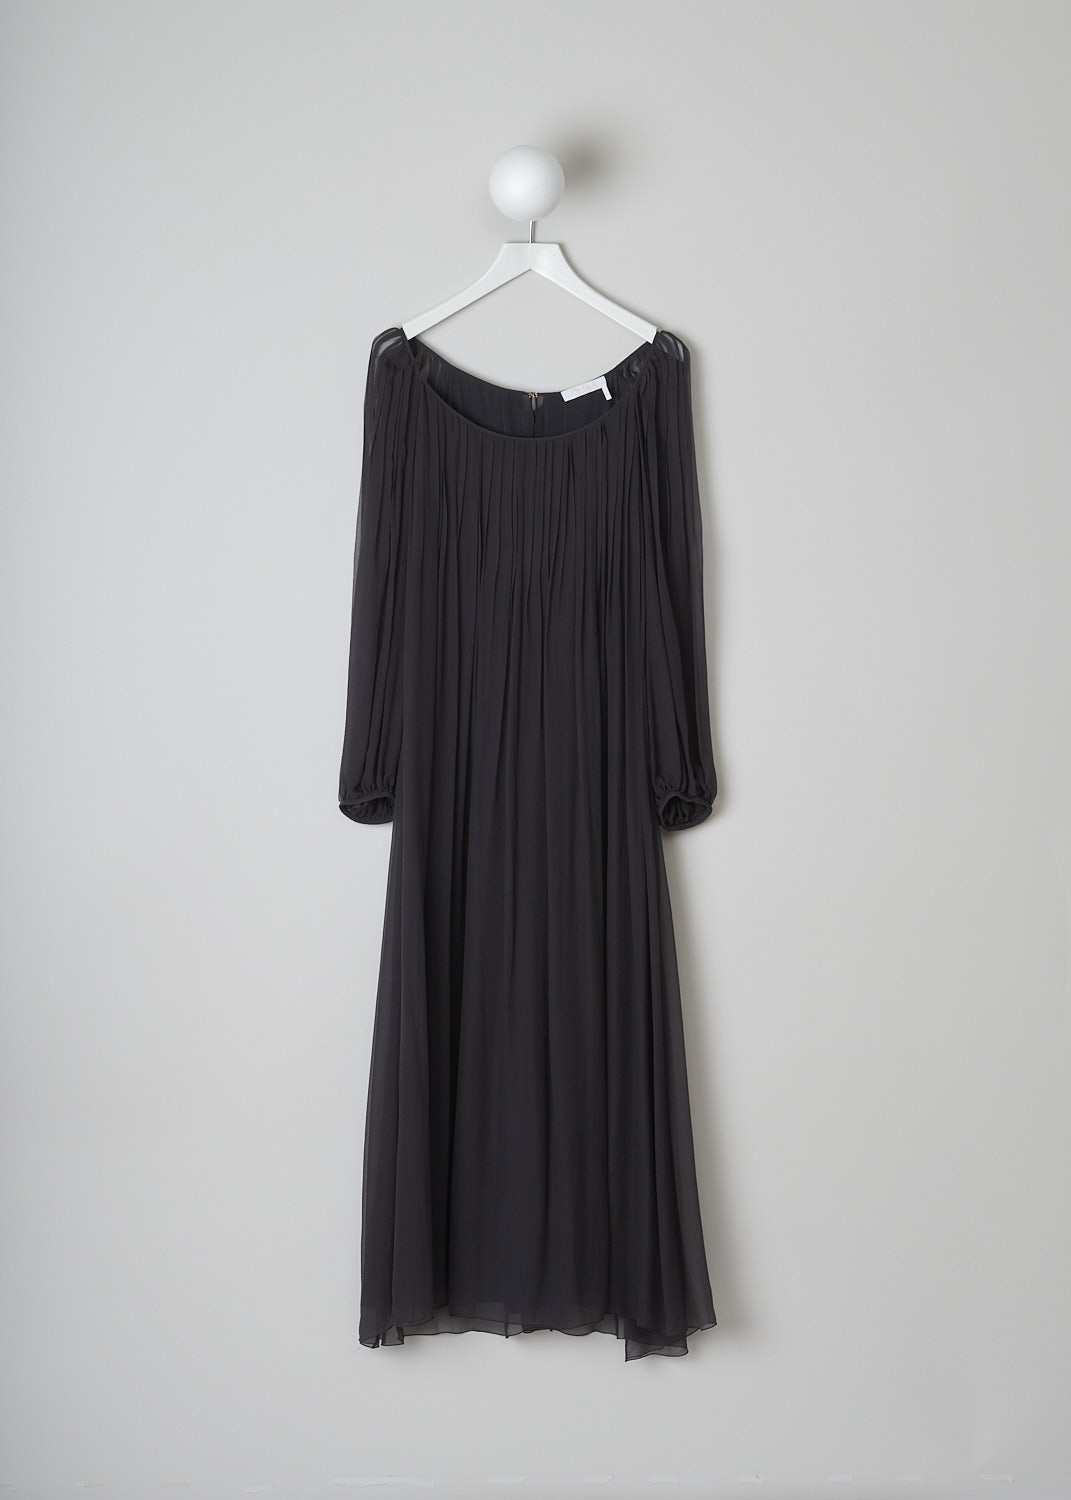 CHLOÃ‰ FLOWY ASH BLACK DRESS, CHC23SRO77101070_070, Black, Grey, Front, This ash black silk midi dress has a wide round neckline. The long semi sheer sleeves have gathered cuffs. The dress has a slip dress sewn in under the flowy sheer silk fabric. In the back, a hook-and-eye and four ties function as the closure. 
